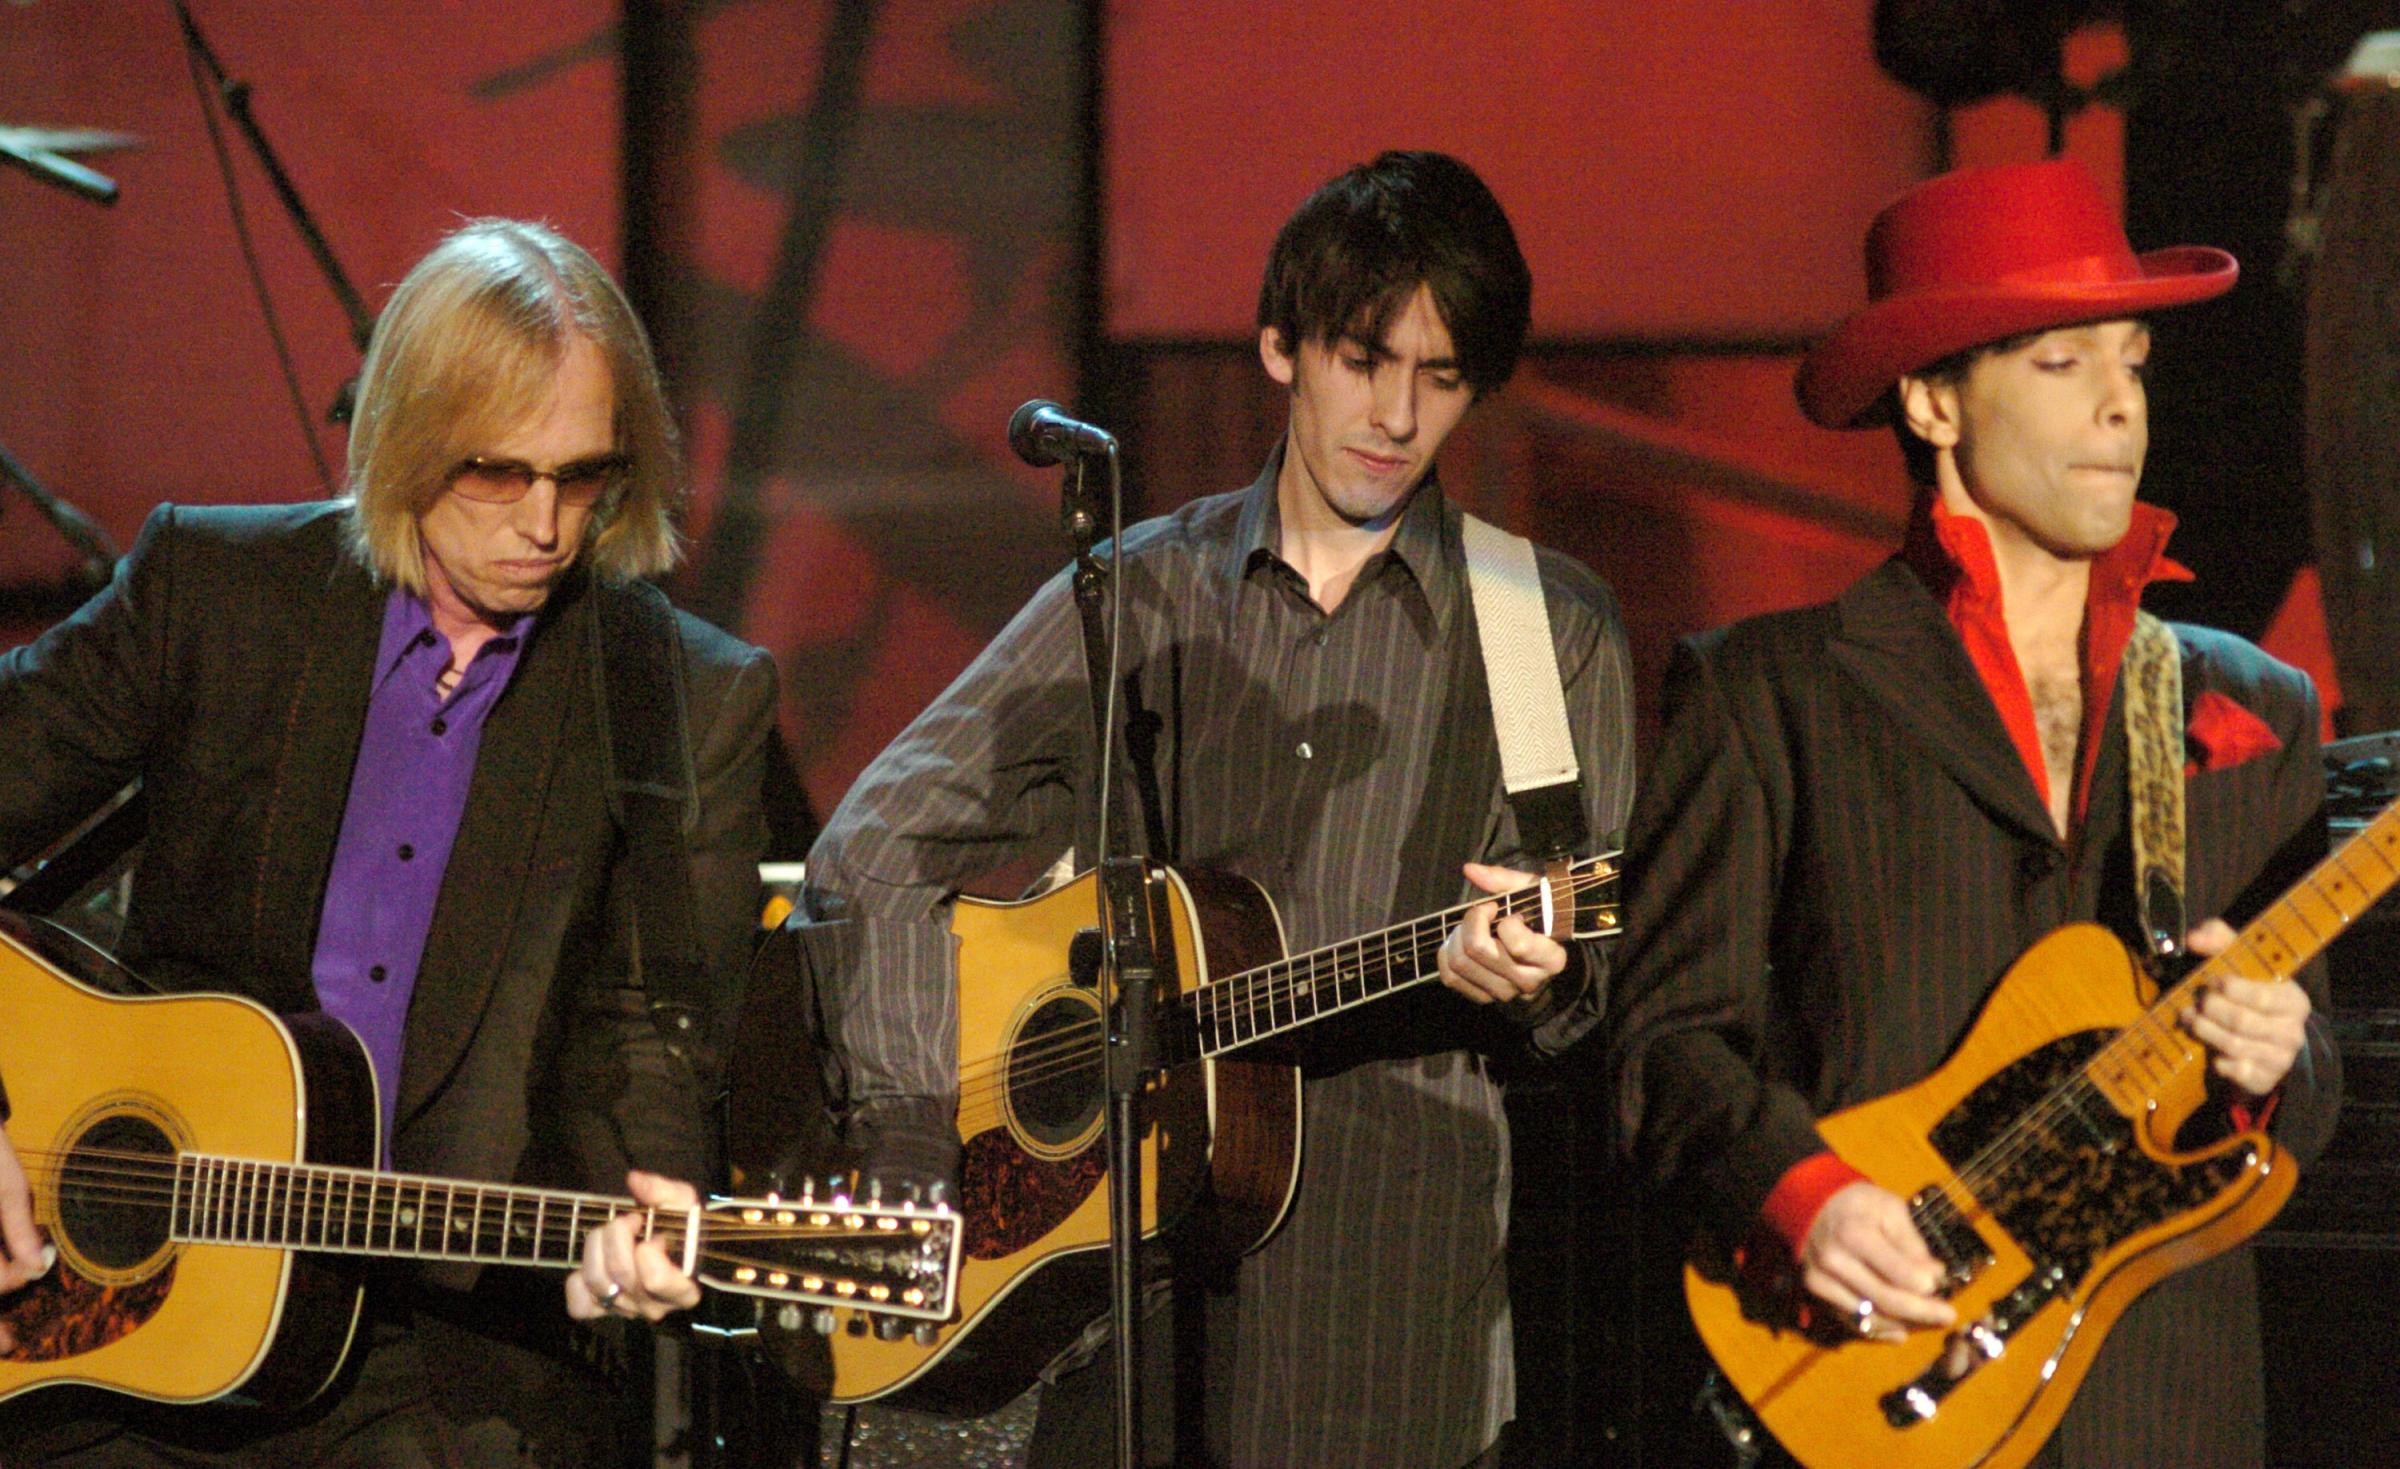 From left: Tom Petty, Dhani Harrison and Prince perform during The 19th Annual Rock and Roll Hall of Fame Induction Ceremony in New York City on March 15, 2004. Prince was inducted into the Hall of Fame that evening.